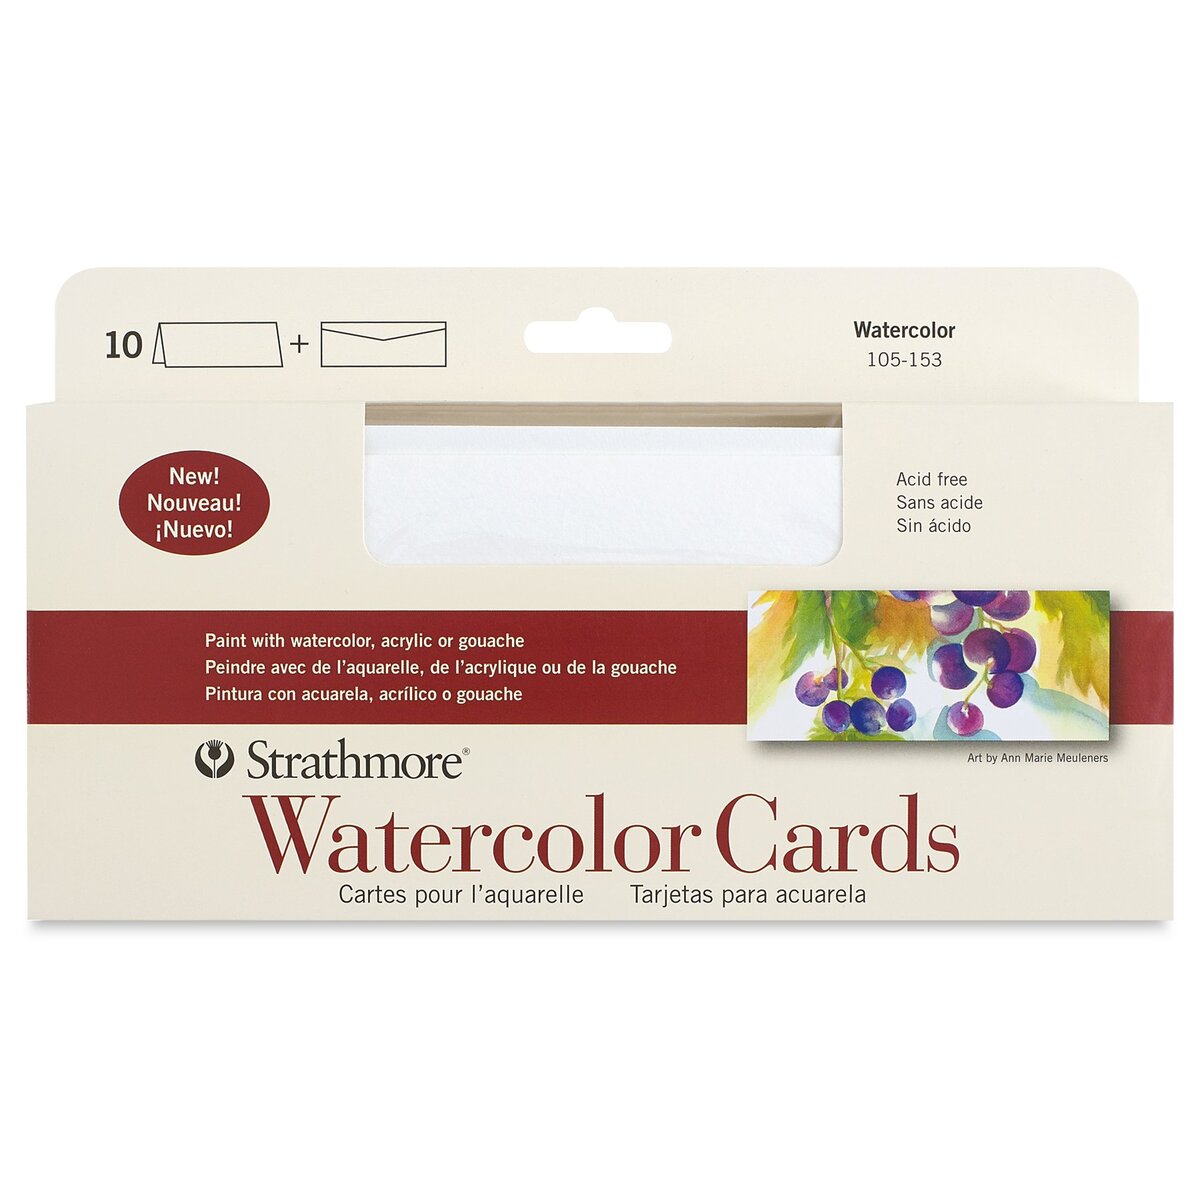 Strathmore Watercolor Cards and Envelopes - Silm, Box of 10 | BLICK Art ...